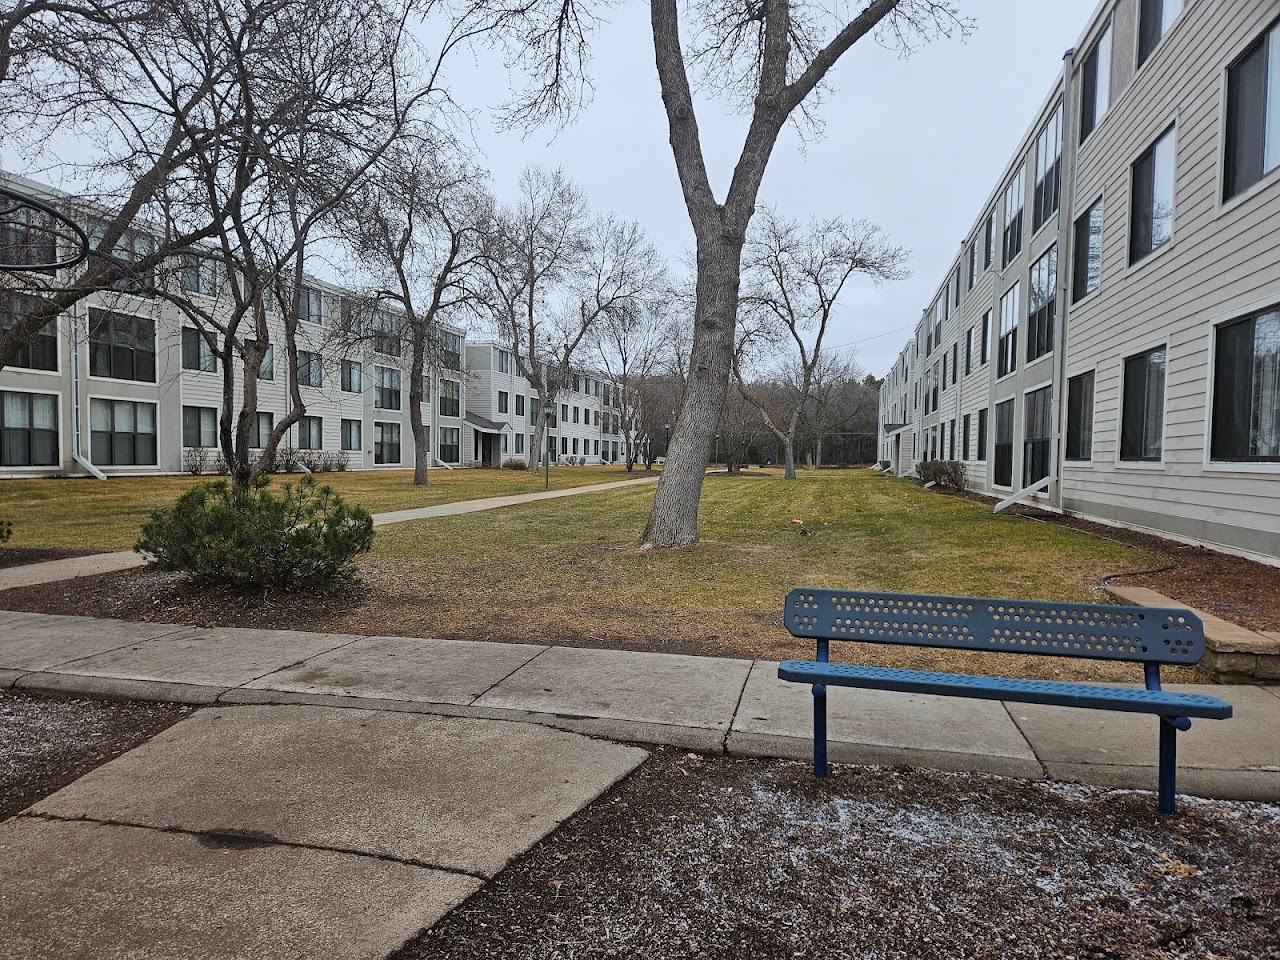 Photo of MISSISSIPPI VIEW APARTMENTS. Affordable housing located at MULTIPLE BUILDING ADDRESSES COON RAPIDS, MN 55433